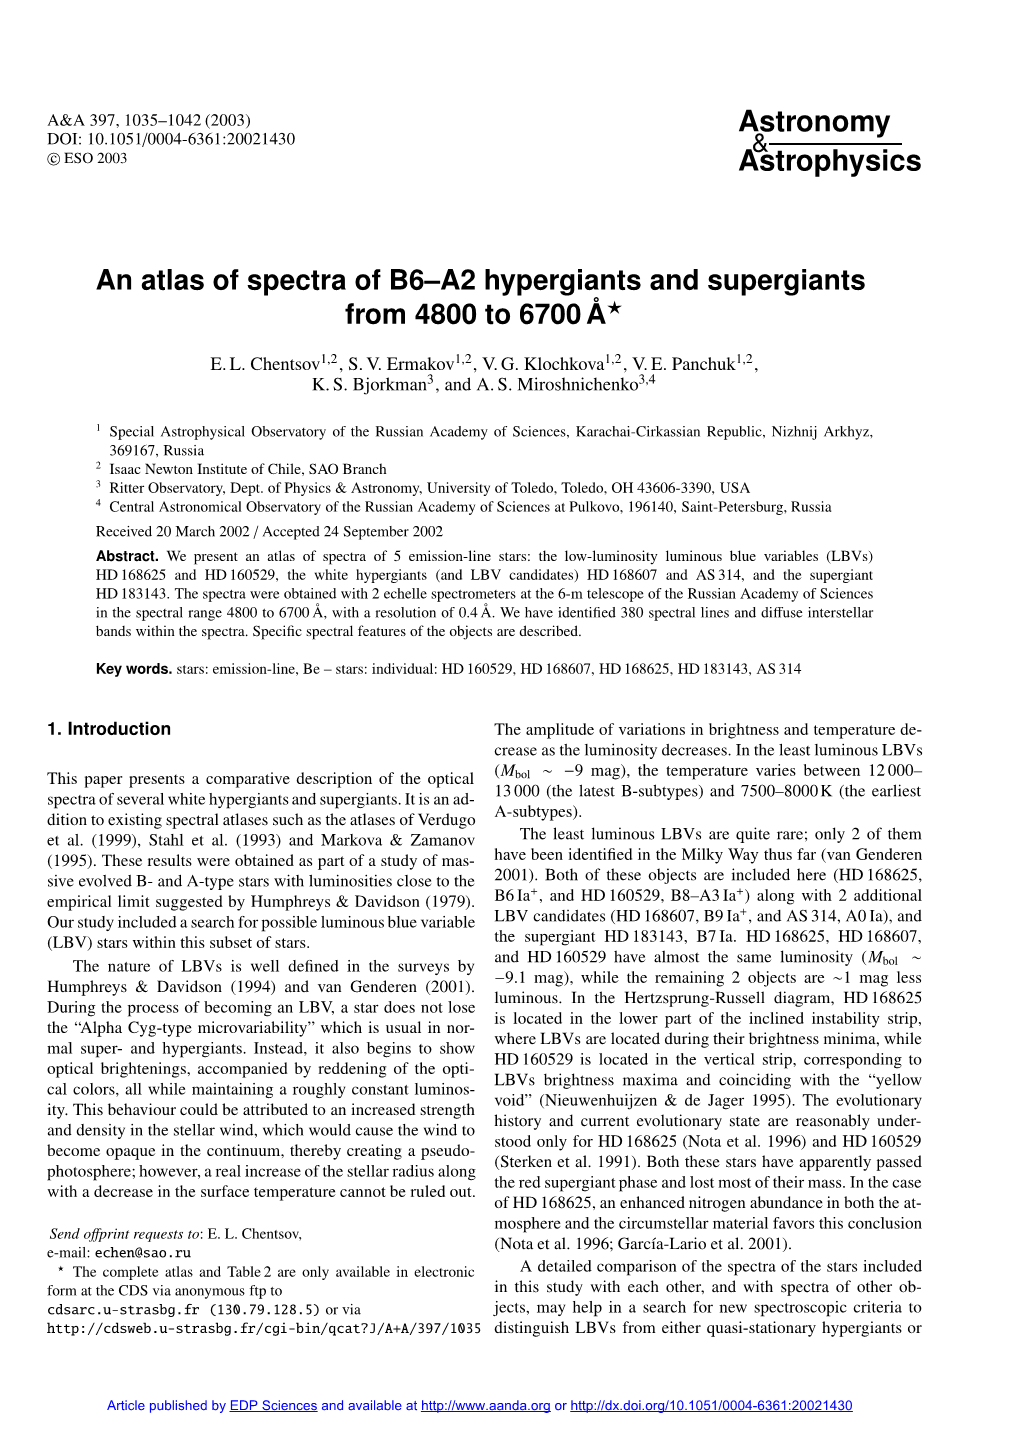 An Atlas of Spectra of B6–A2 Hypergiants and Supergiants from 4800 to 6700 Å?